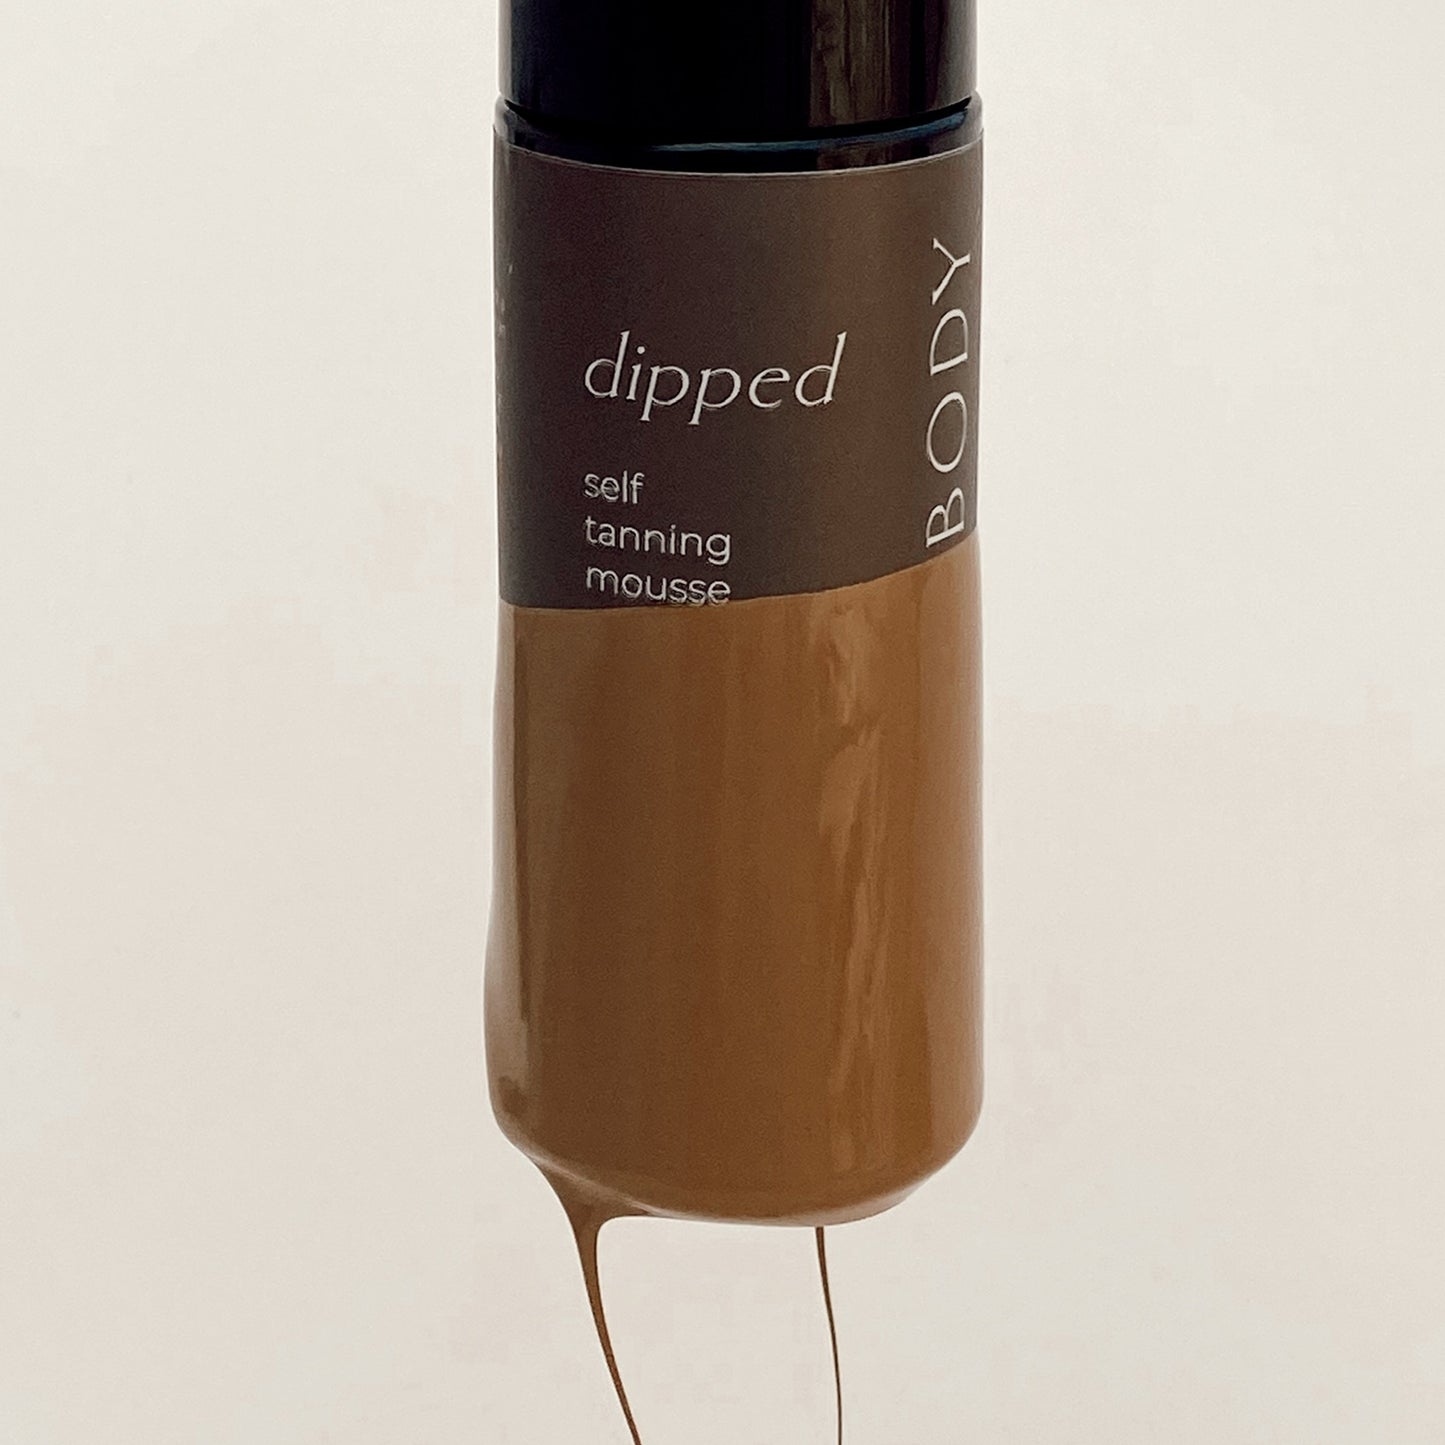 Dipped Self Tanning Mousse